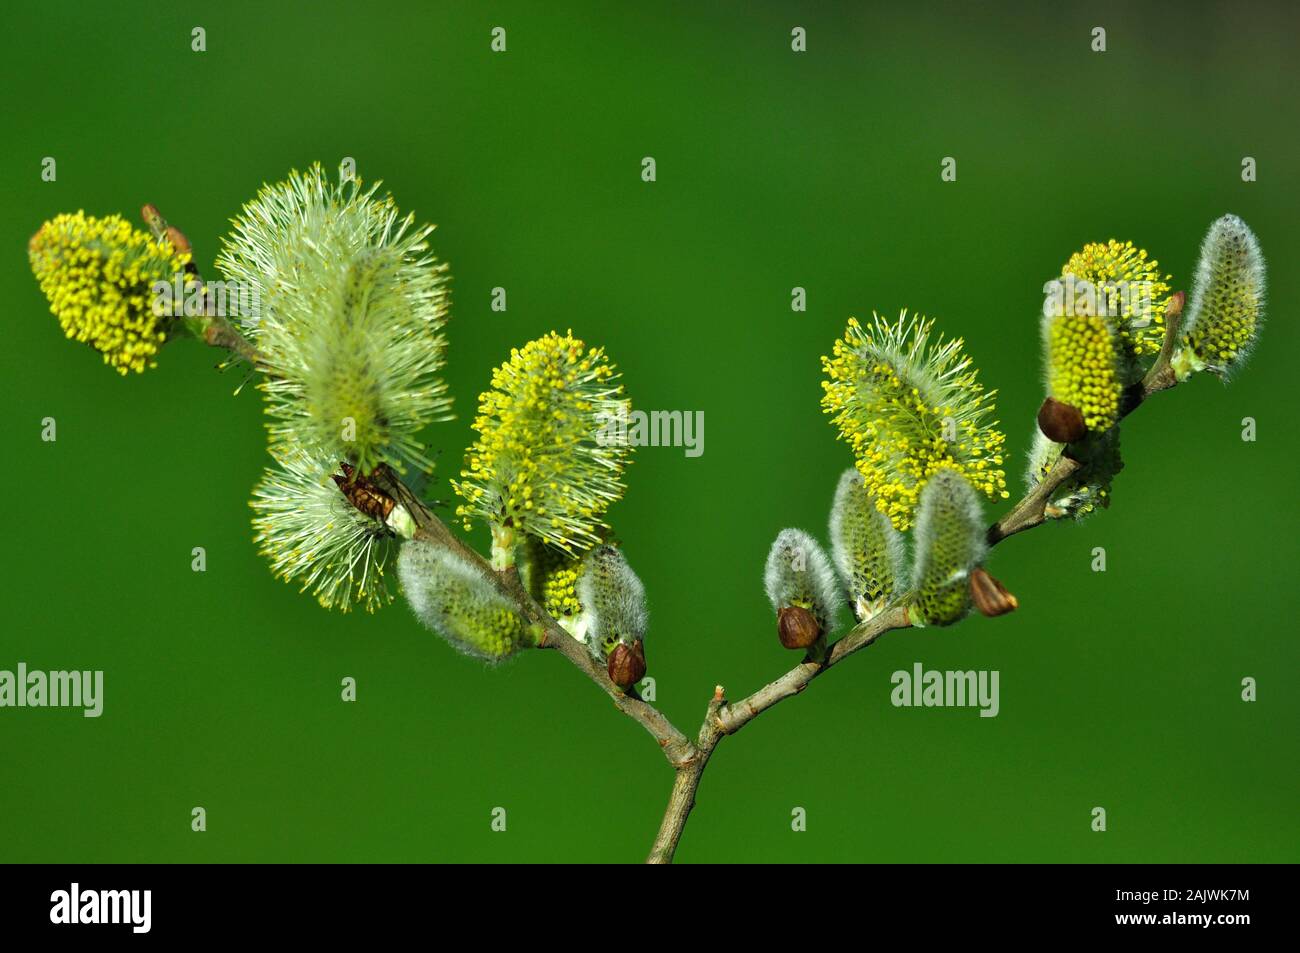 Male goat willow or sallow catkins Stock Photo